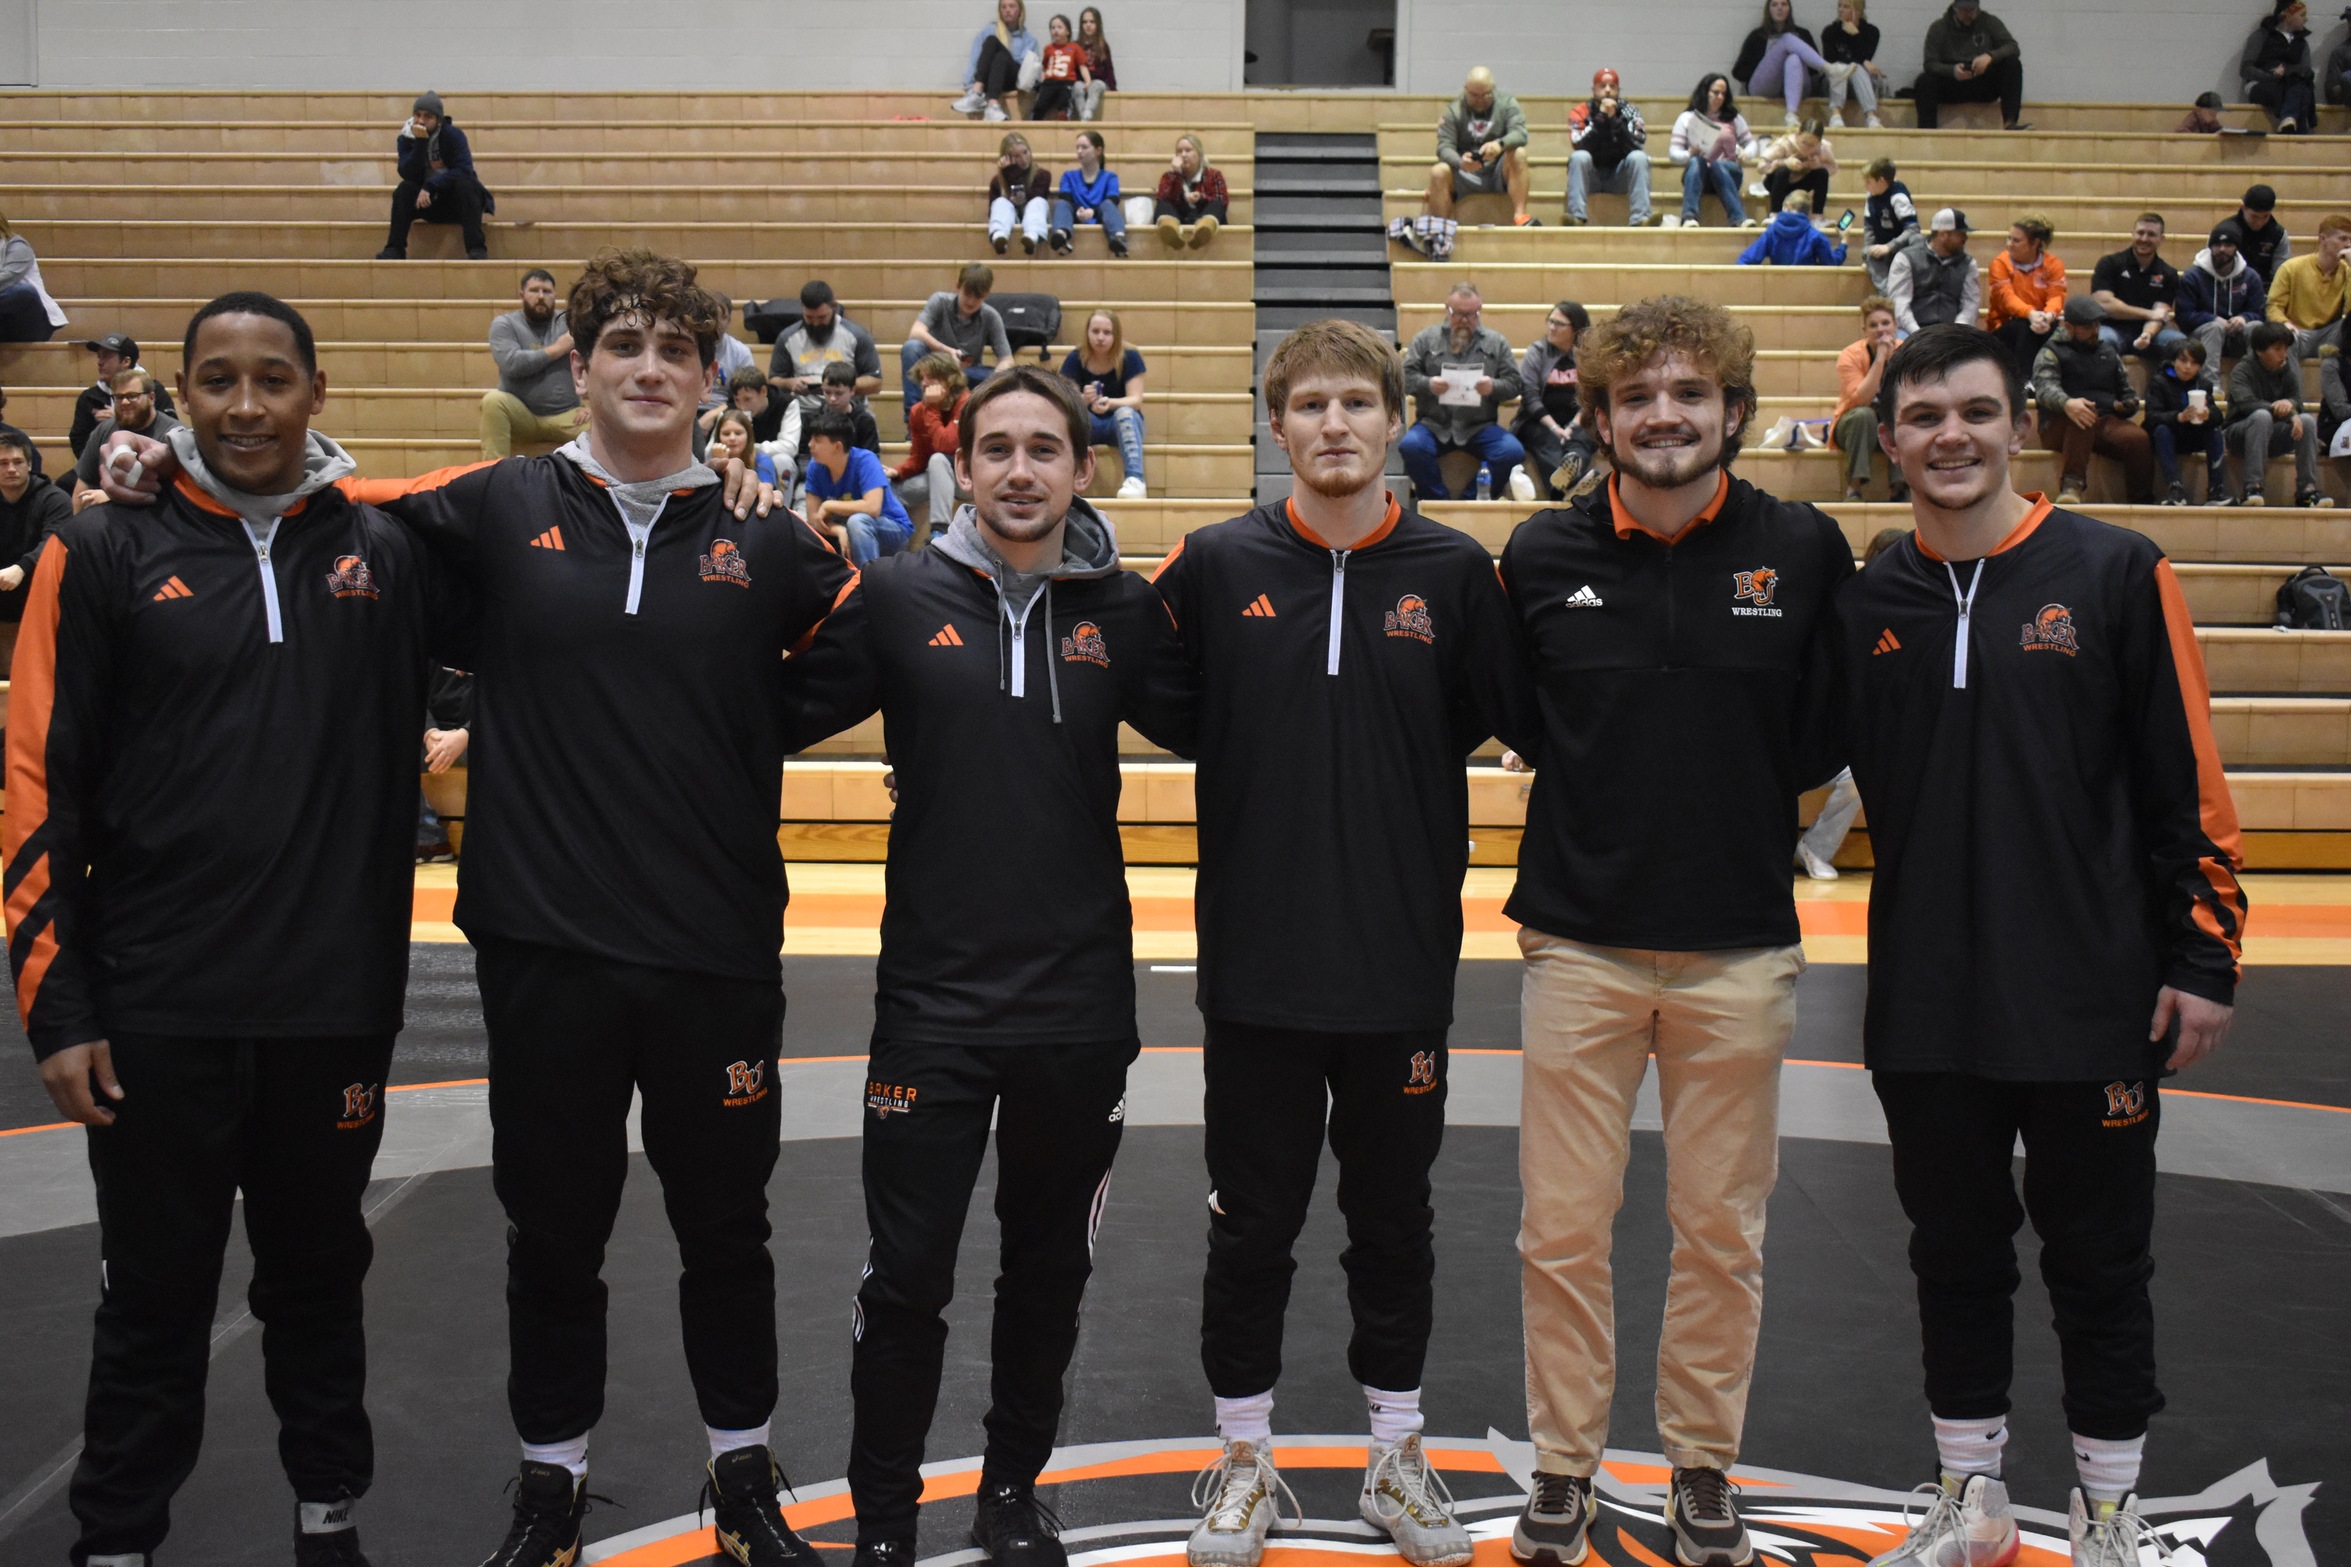 Wildcats Deliver Exciting 22-18 Victory over Central Methodist in Senior Night Dual